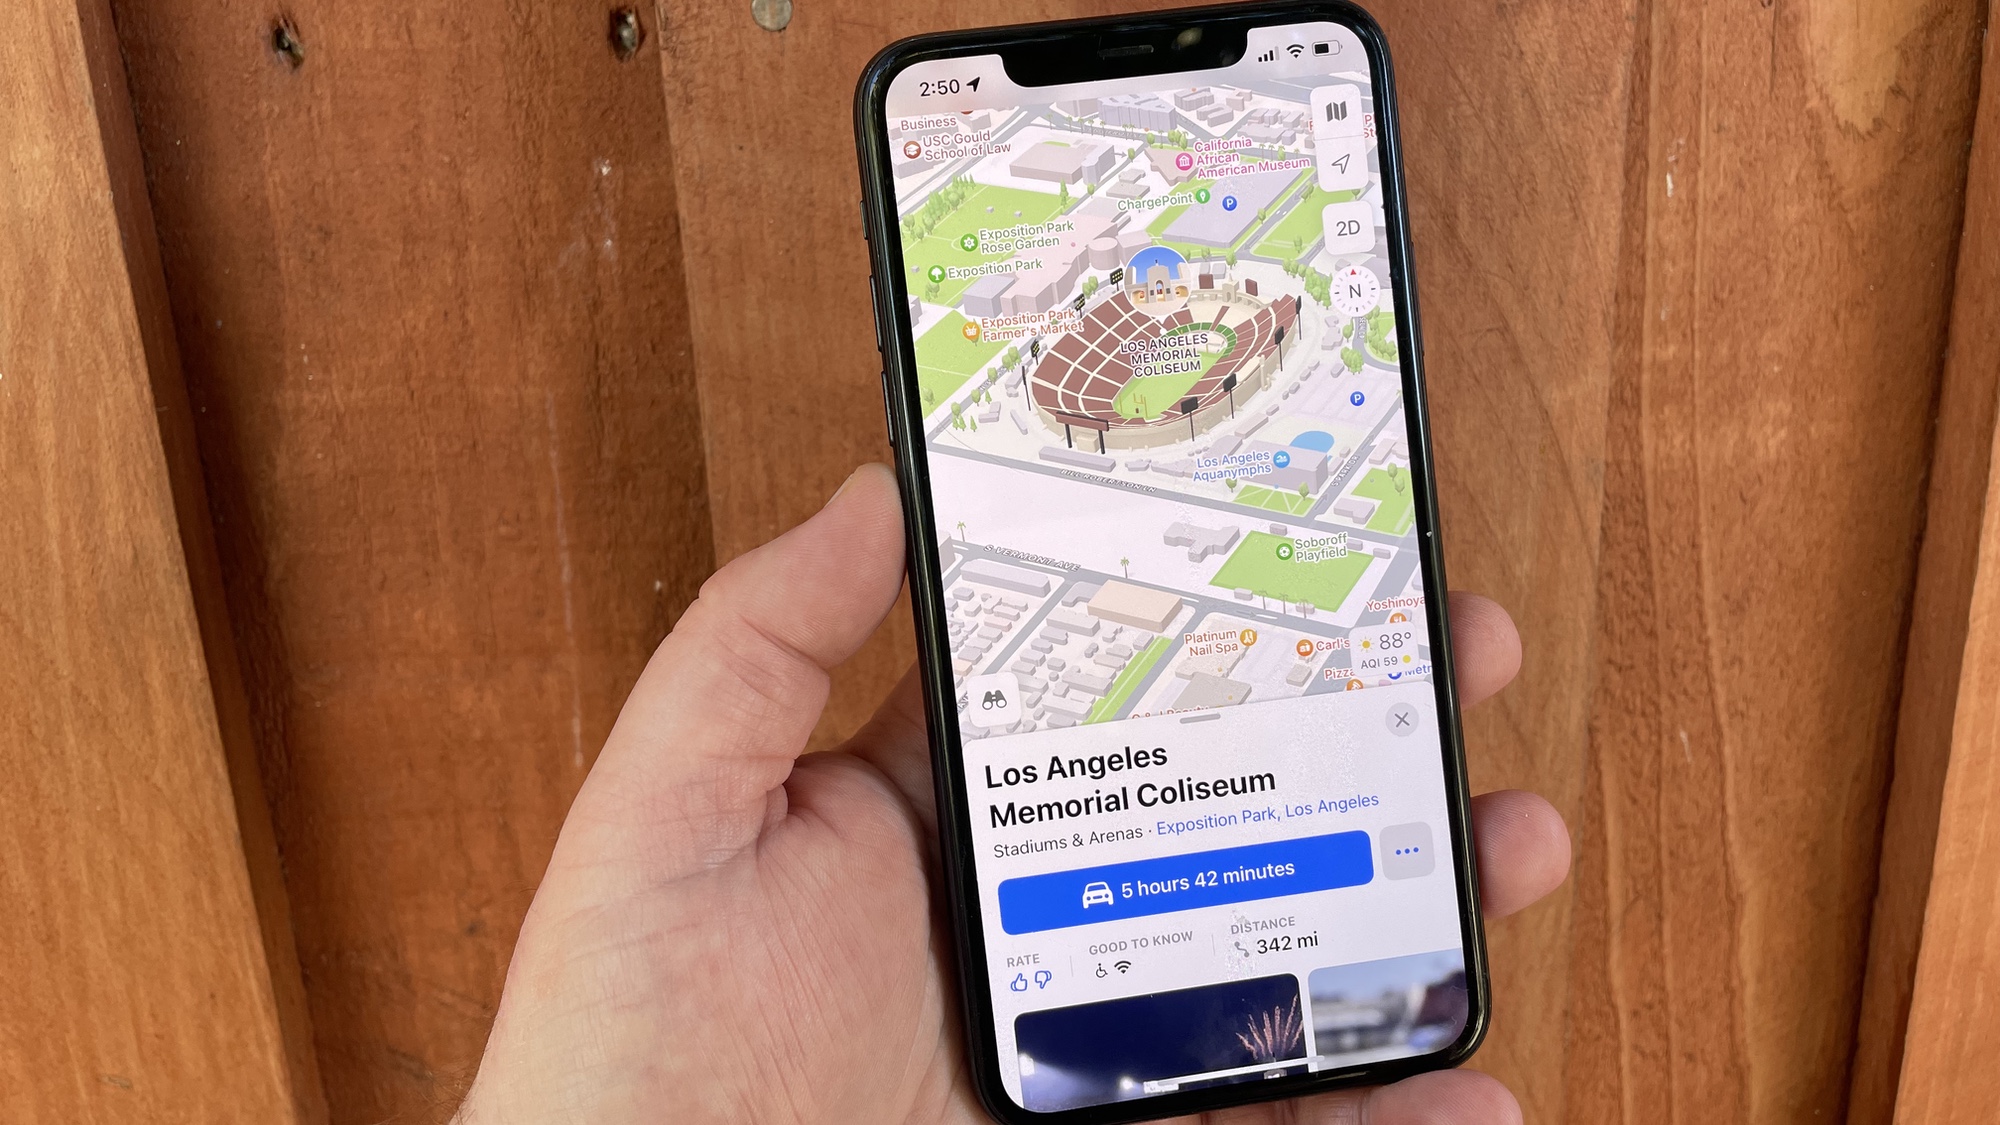 iOS 15 maps includes detailed views of Los Angeles, San Francisco, New York and London